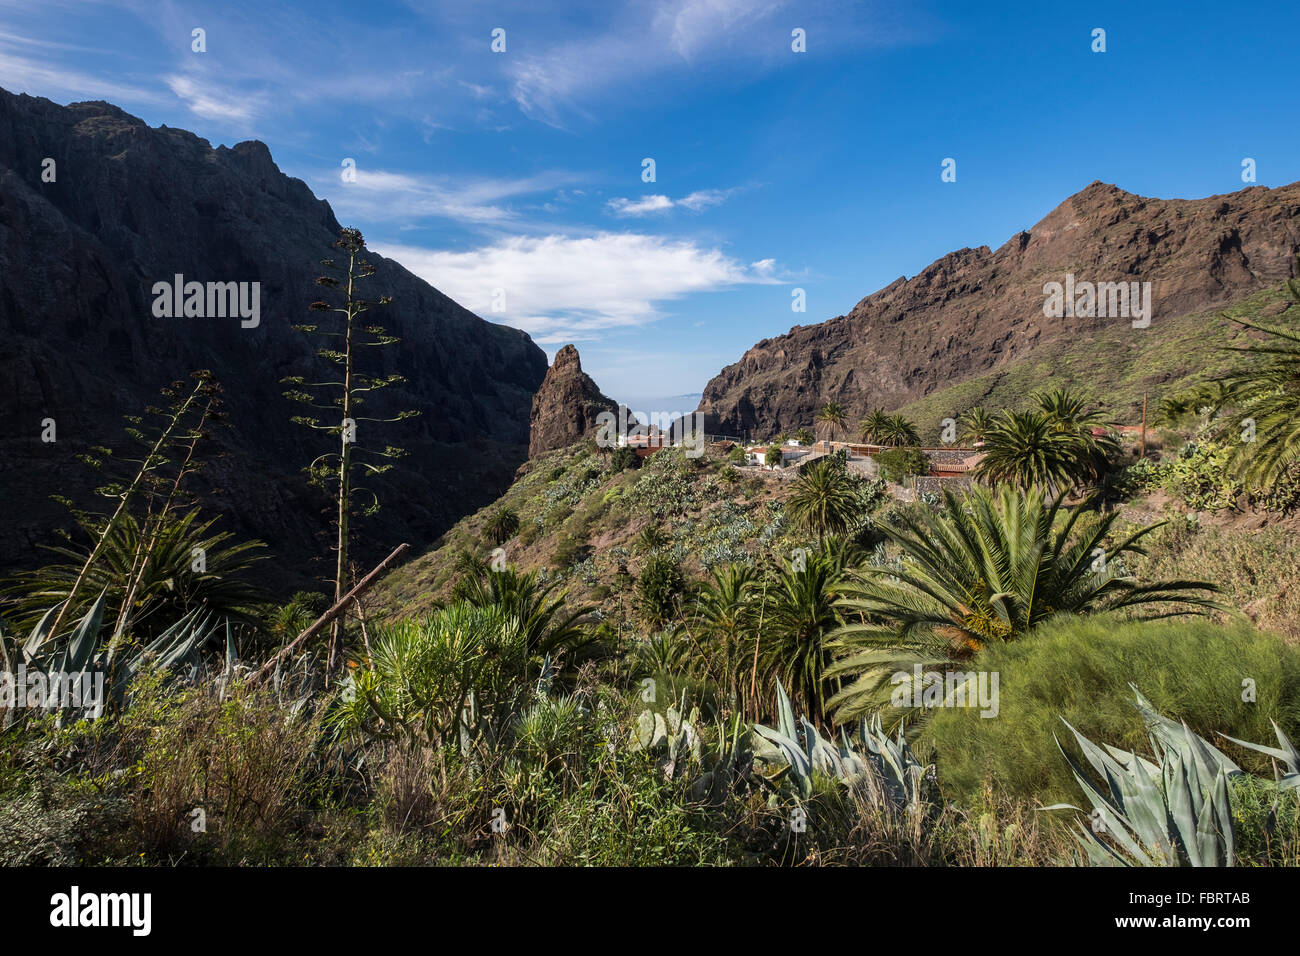 The village of Masca hidden in the Masca barranco on the west coast of Tenerife above the Gigantes cliffs, Canary Islands, Spain Stock Photo